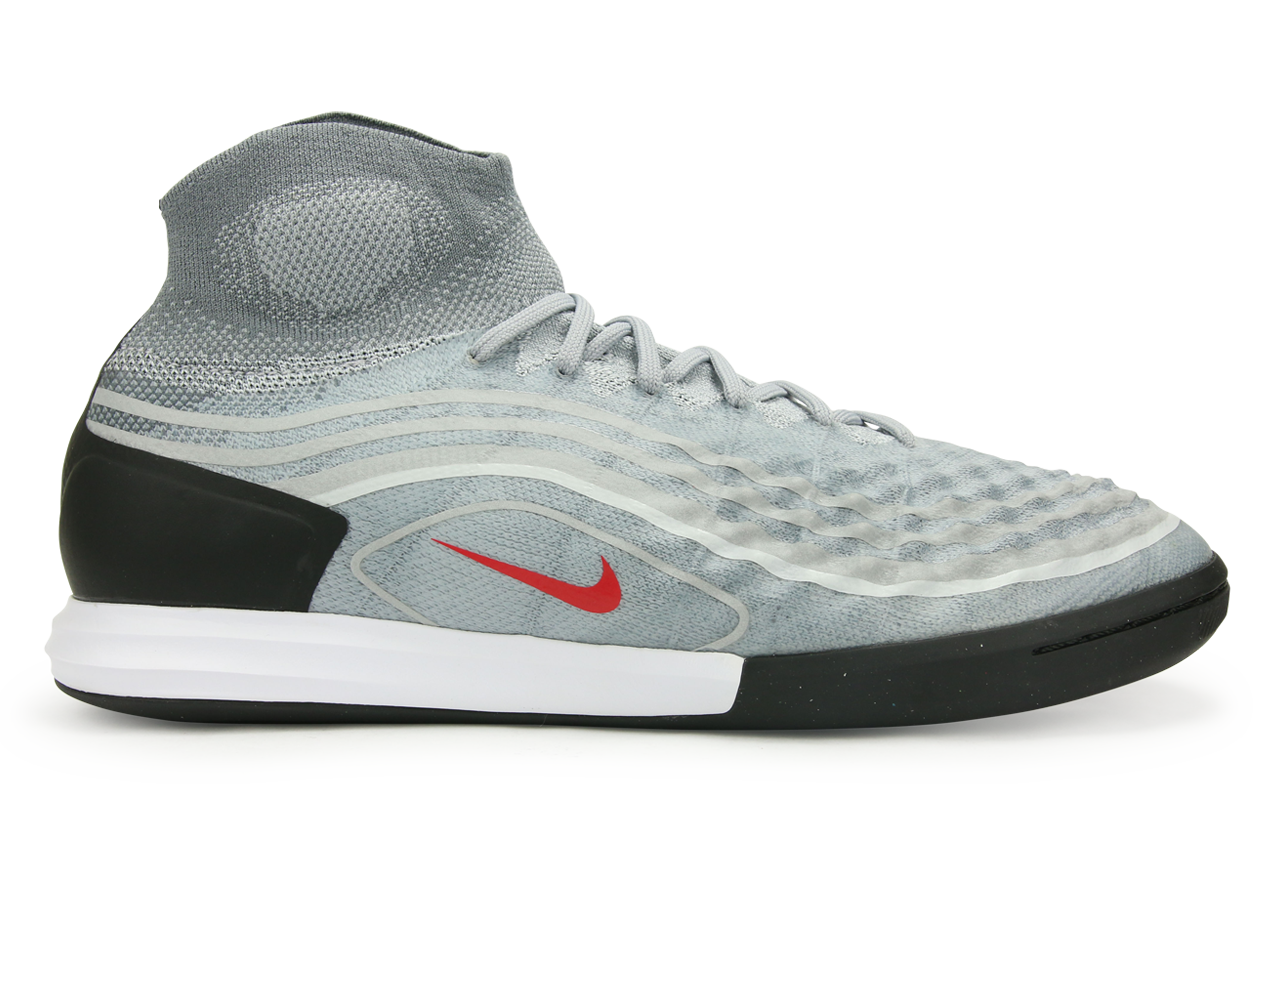 Nike, Nike Men's MagistaX Proximo II Dynamic Fit Indoor Soccer Shoes Cool Grey/Varsity Red/Black/Wolf Grey